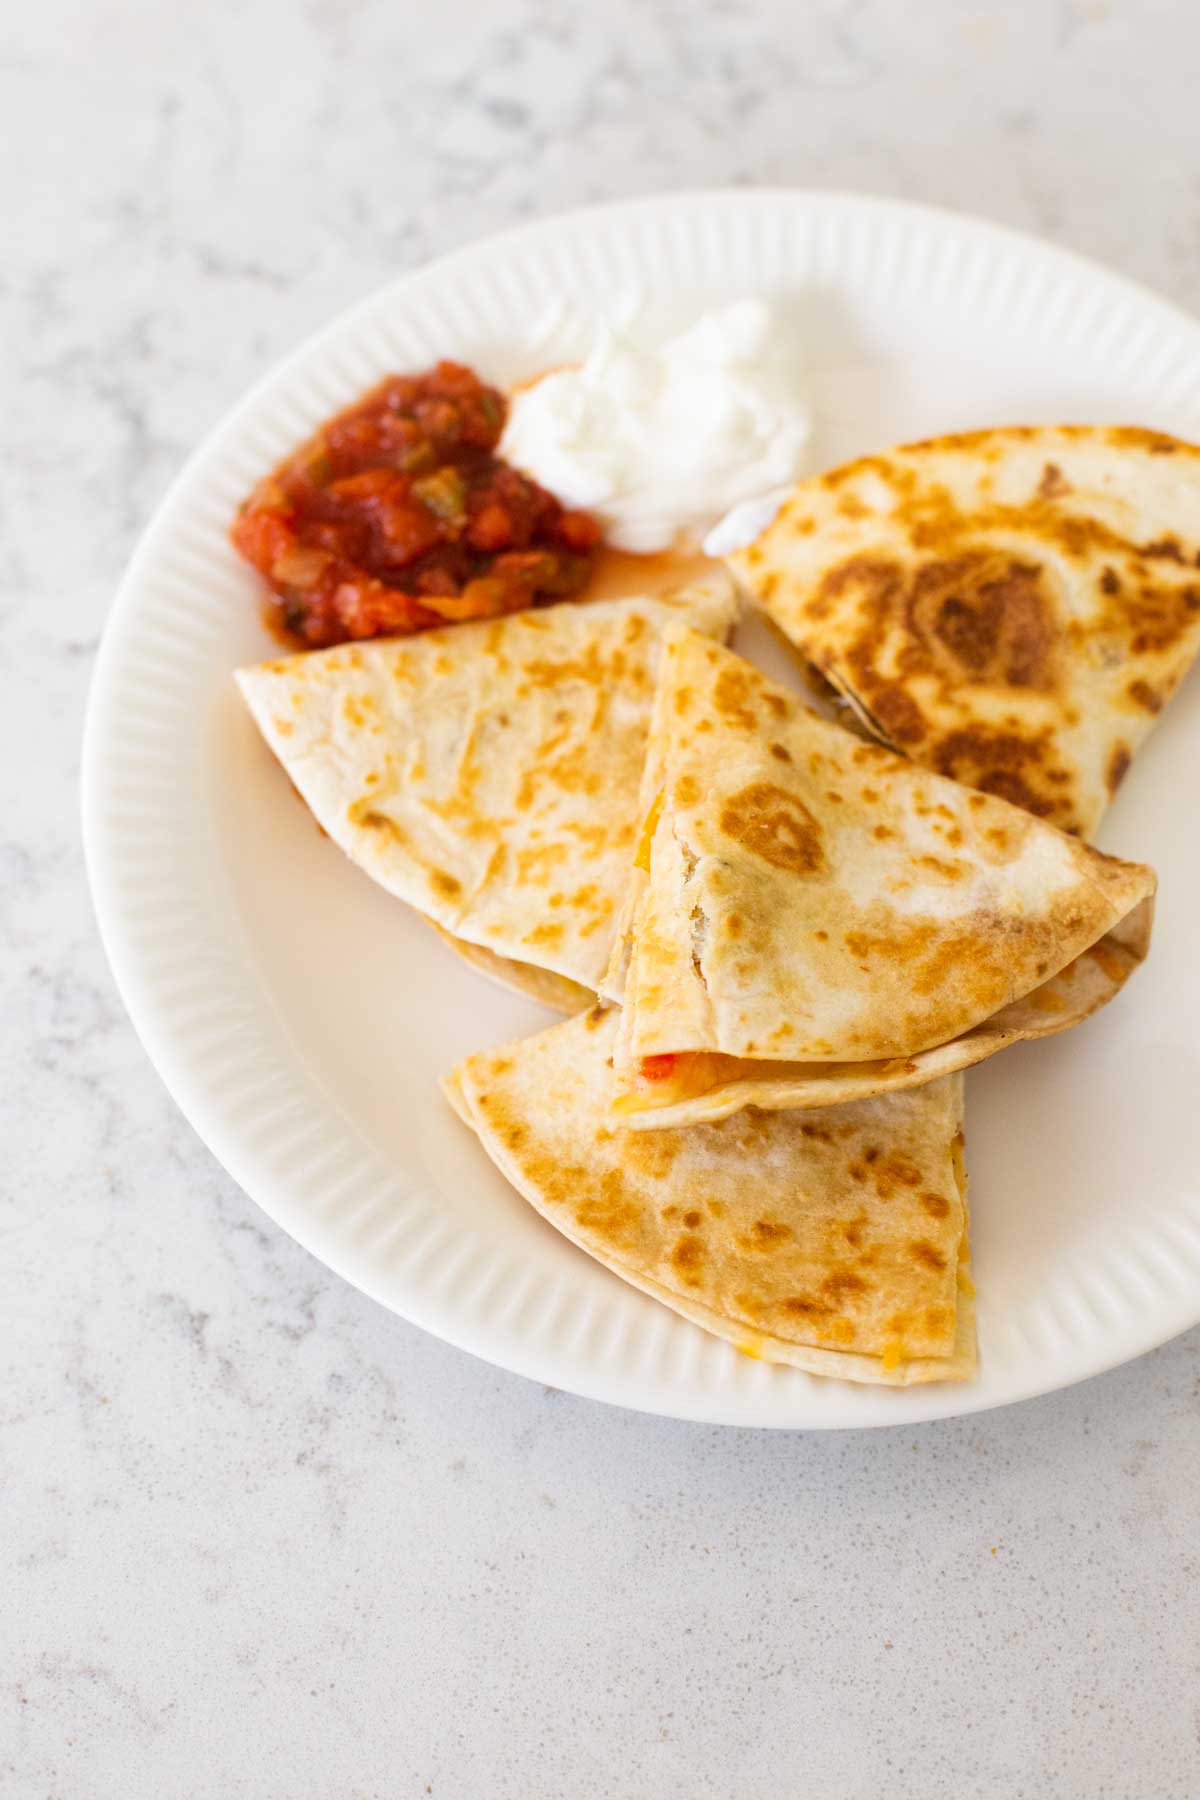 The quesadillas have been served on a dinner plate with a scoop of sour cream and salsa.